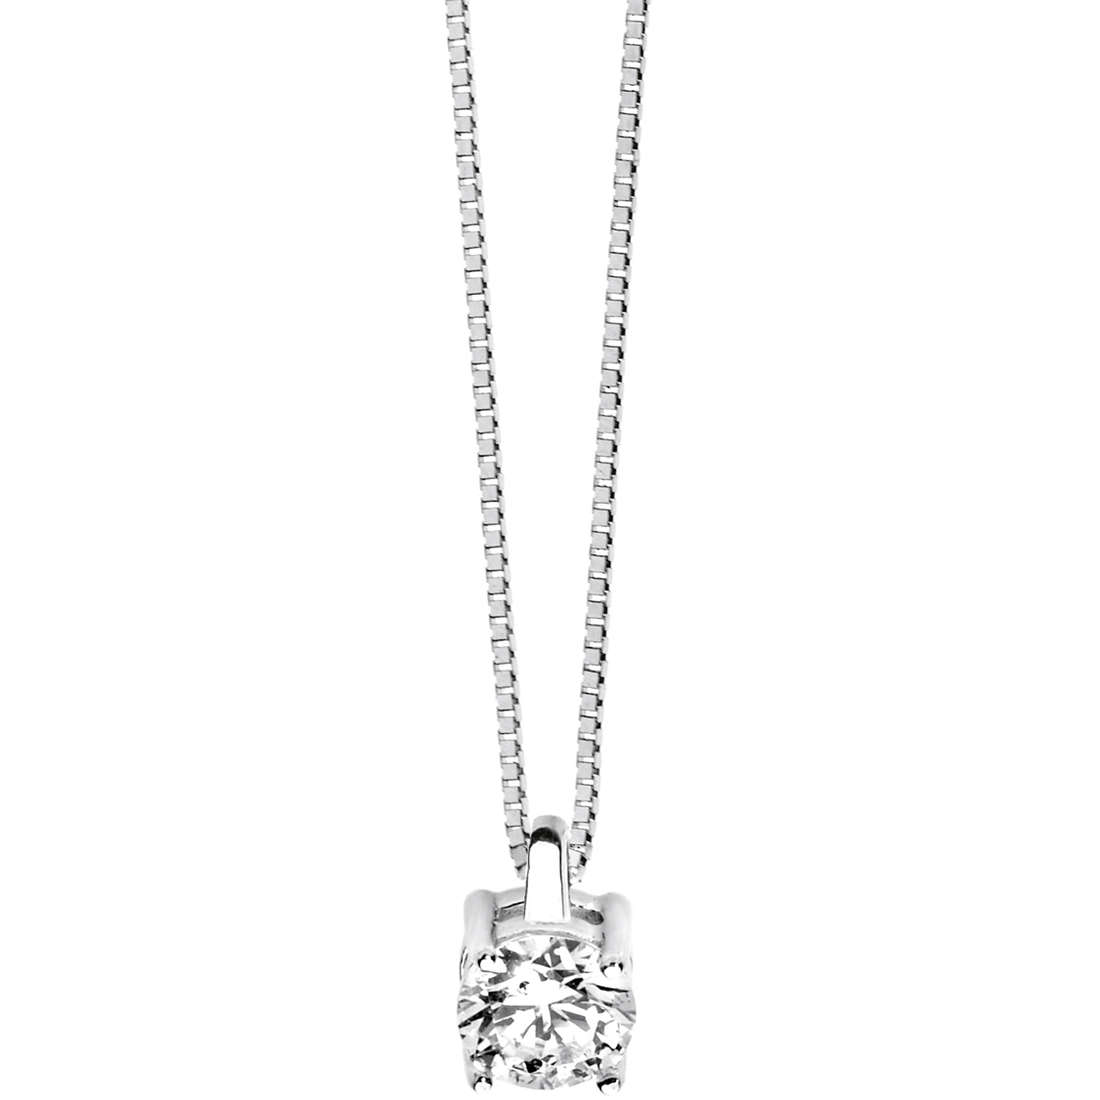 collier Point Lumineux Comete Or 18 kt GLB 978